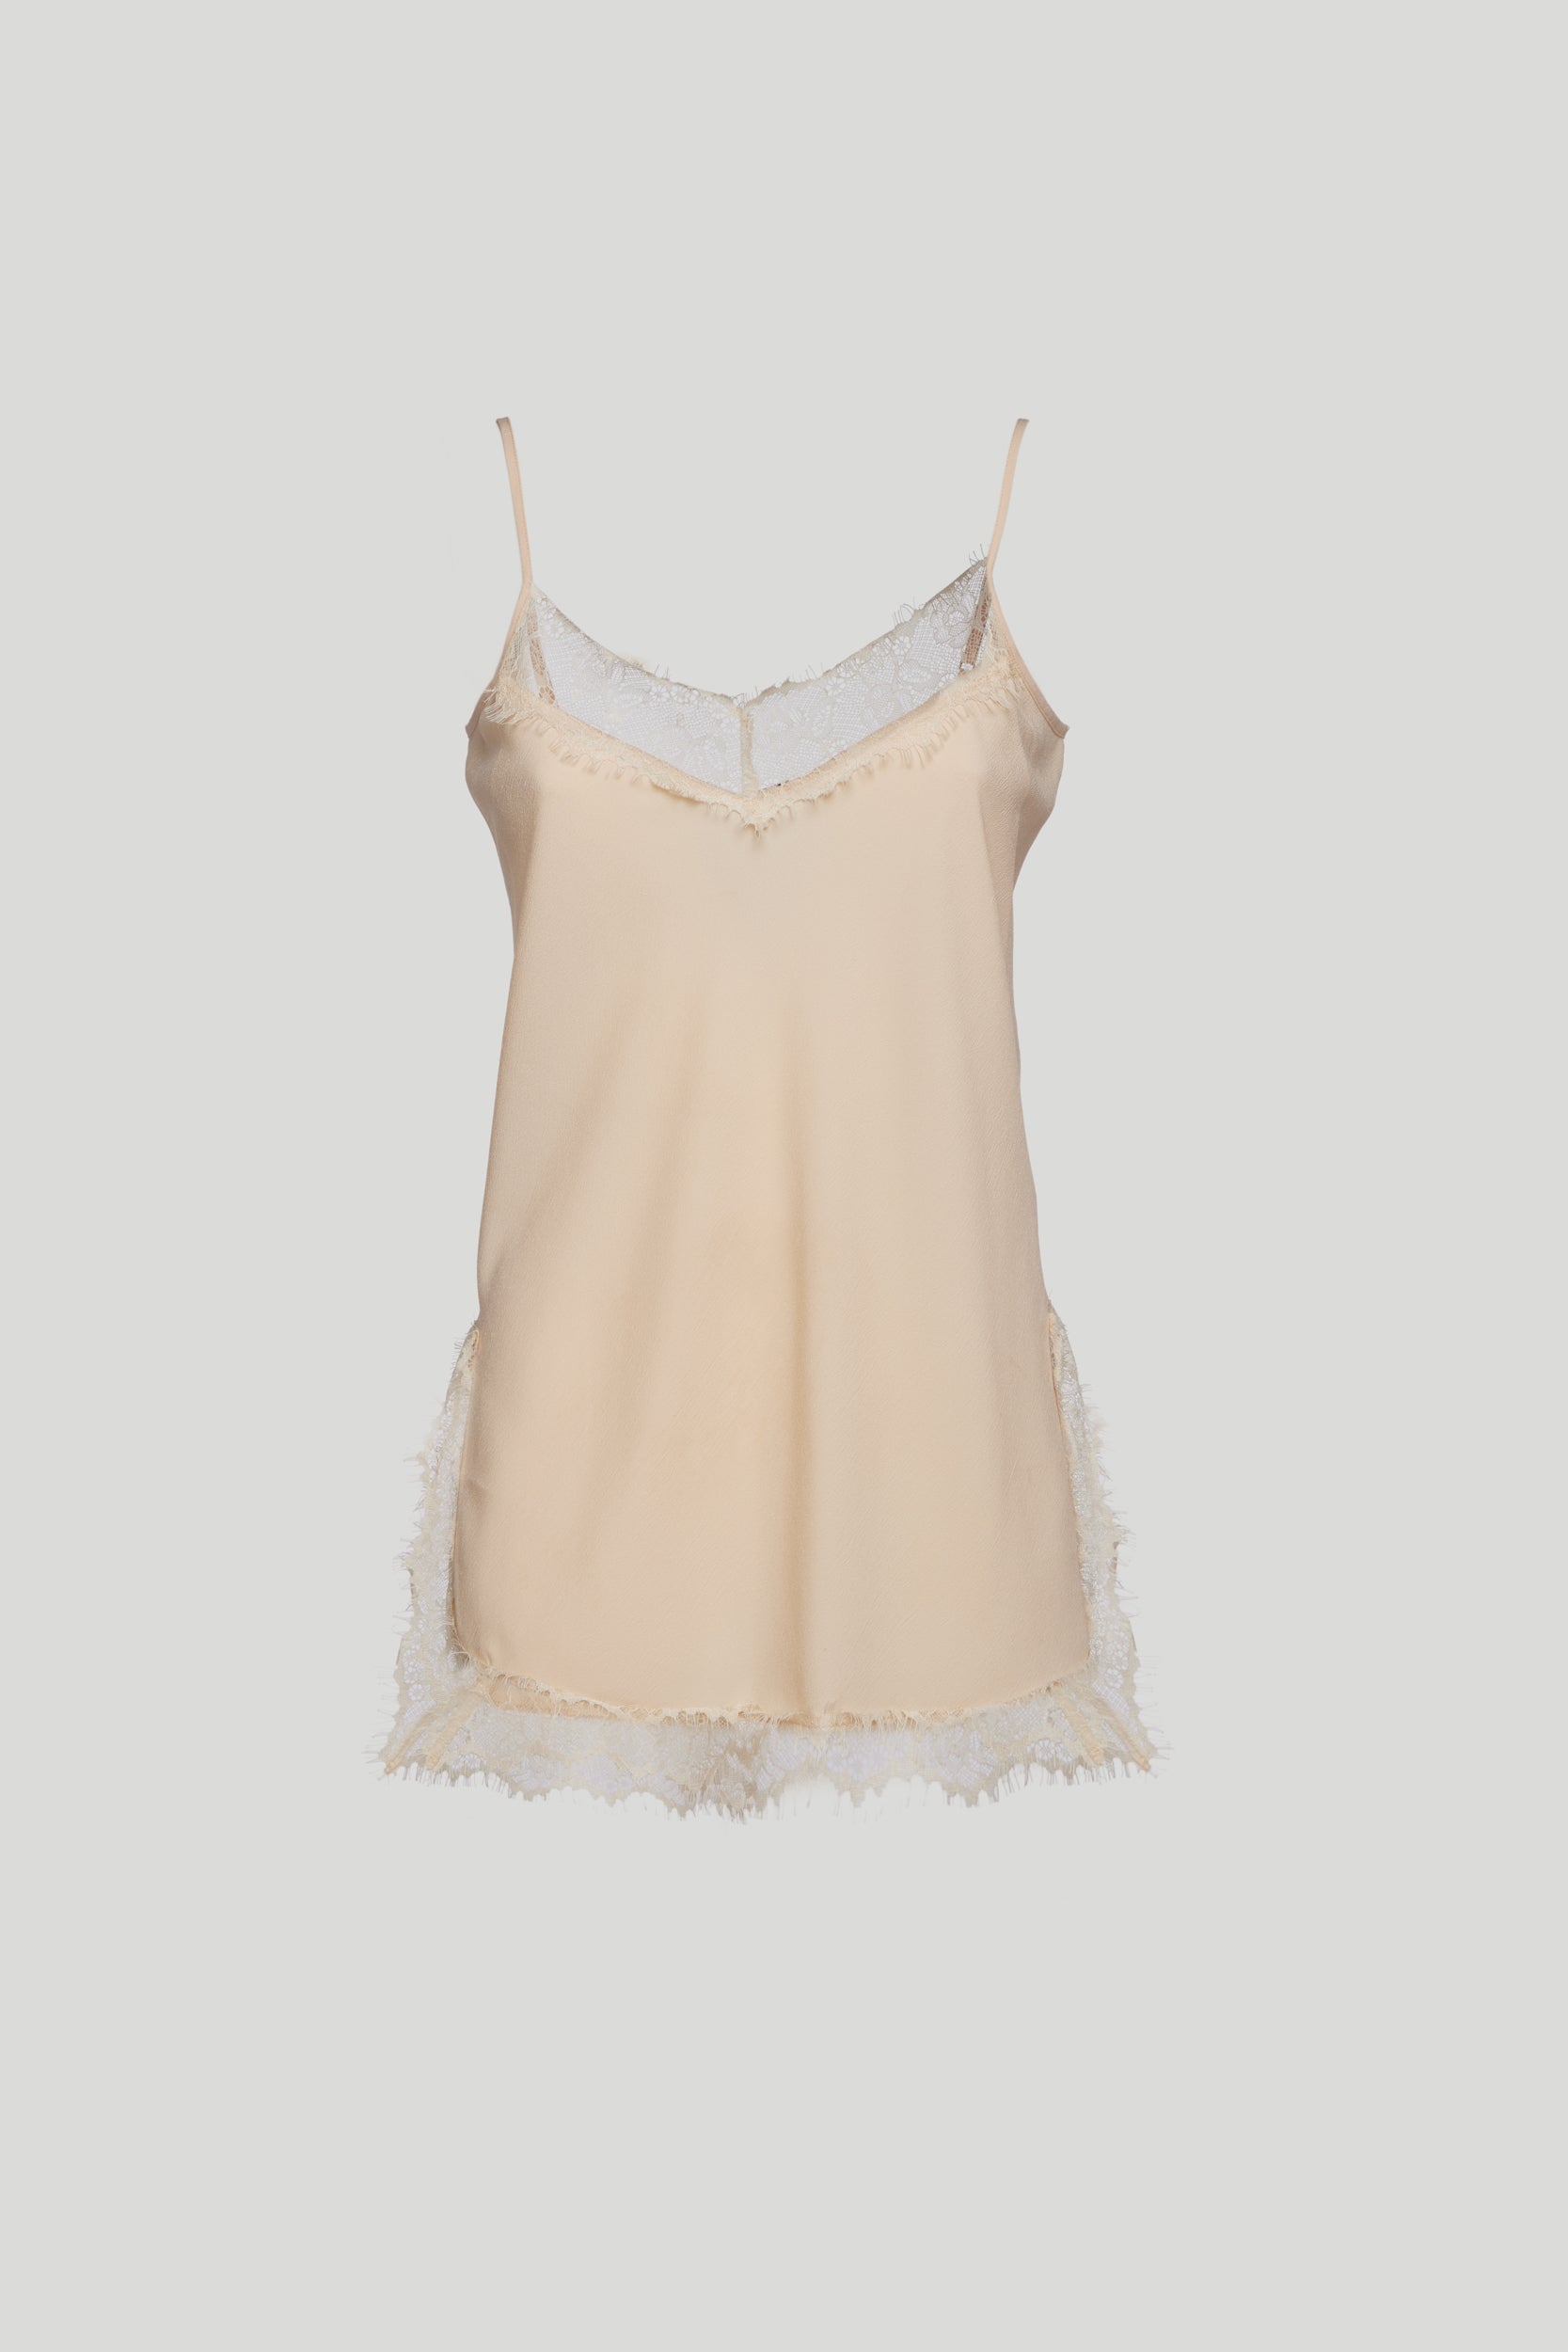 TWINSET Antique Pink and Lace Top